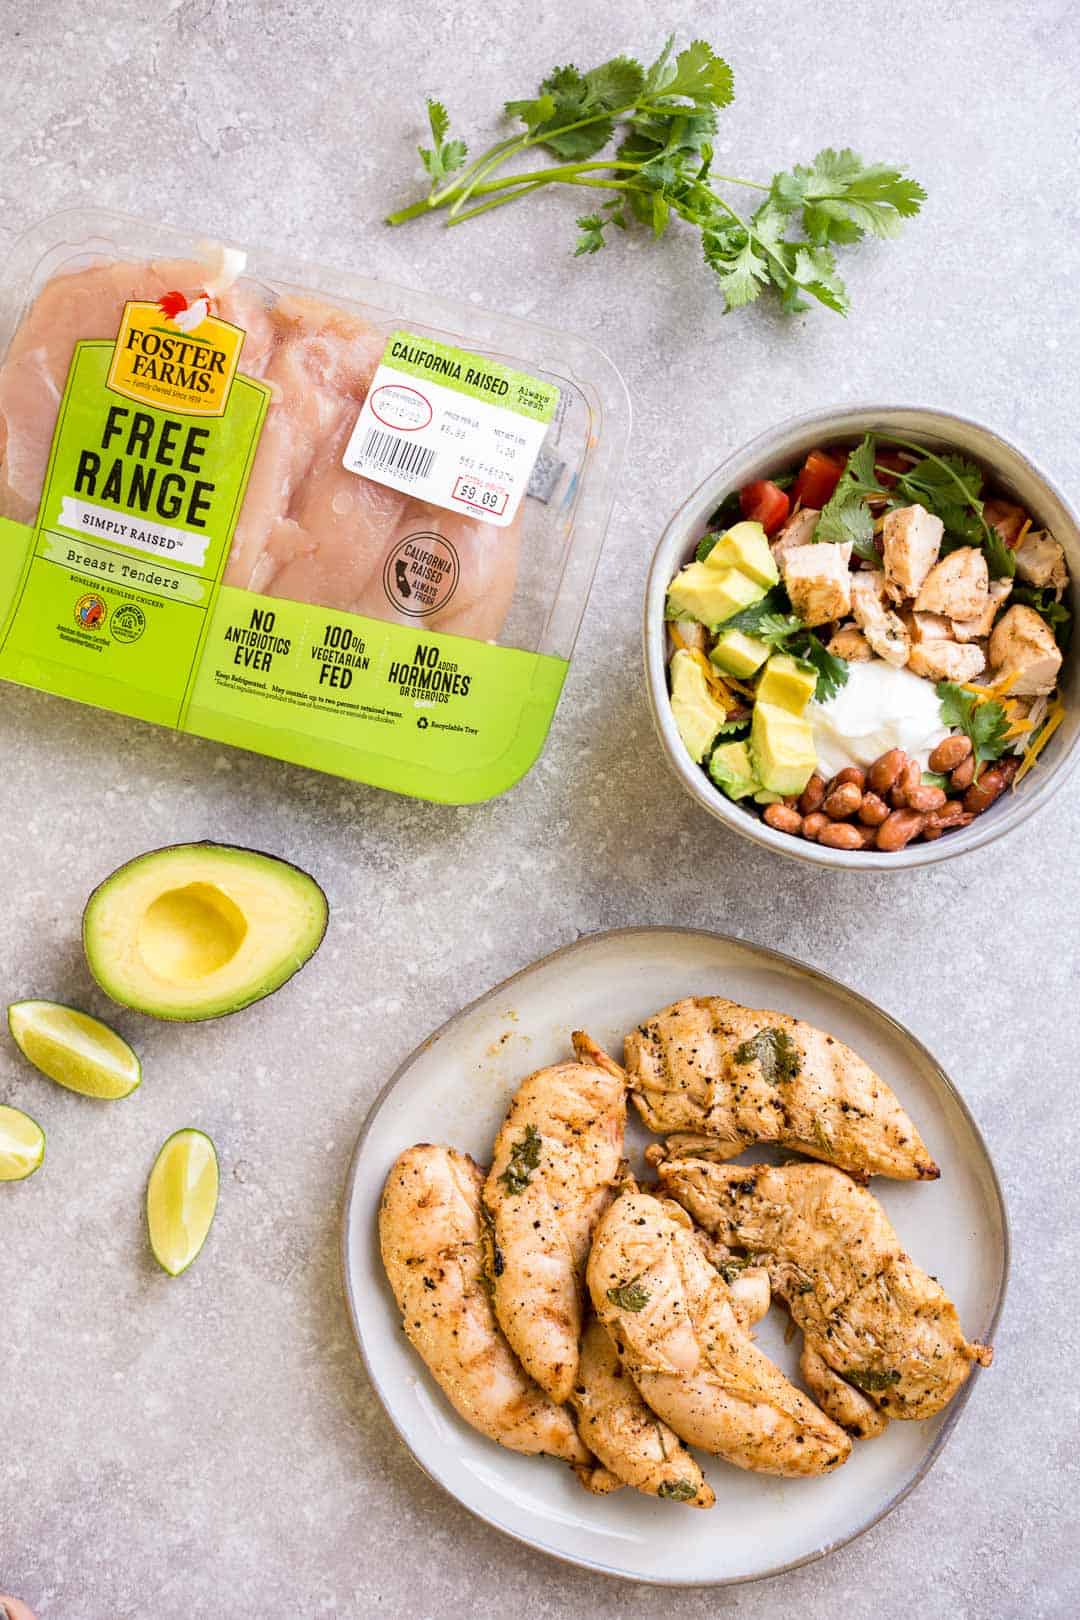 Grilled Chili Lime Chicken breasts next to a package of Foster Farms chicken breasts